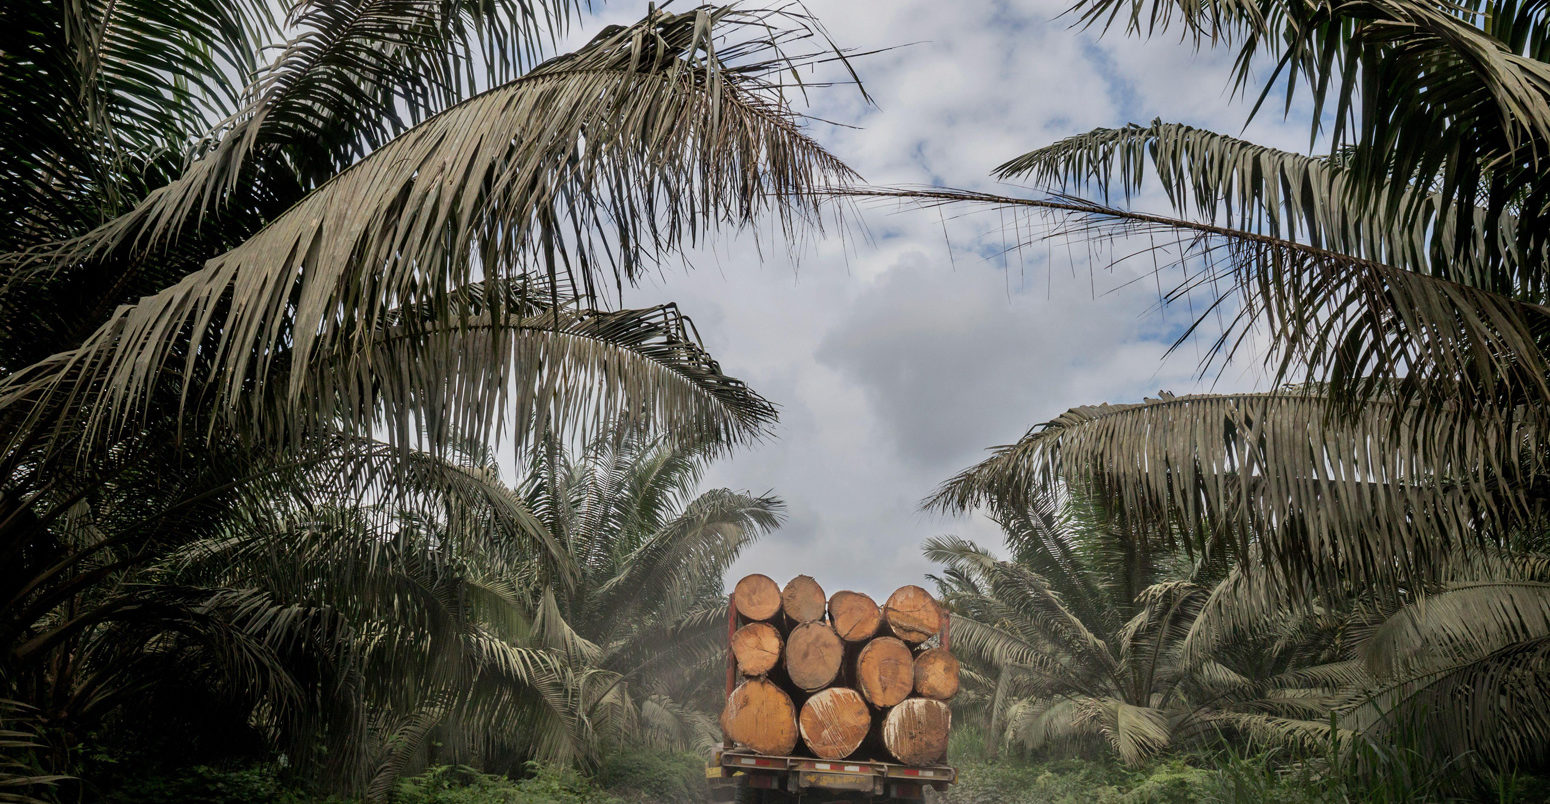 Palm oil crops and deforestation in the Choco Esmeraldas, Ecuador. Credit: Nature Picture Library / Alamy Stock Photo